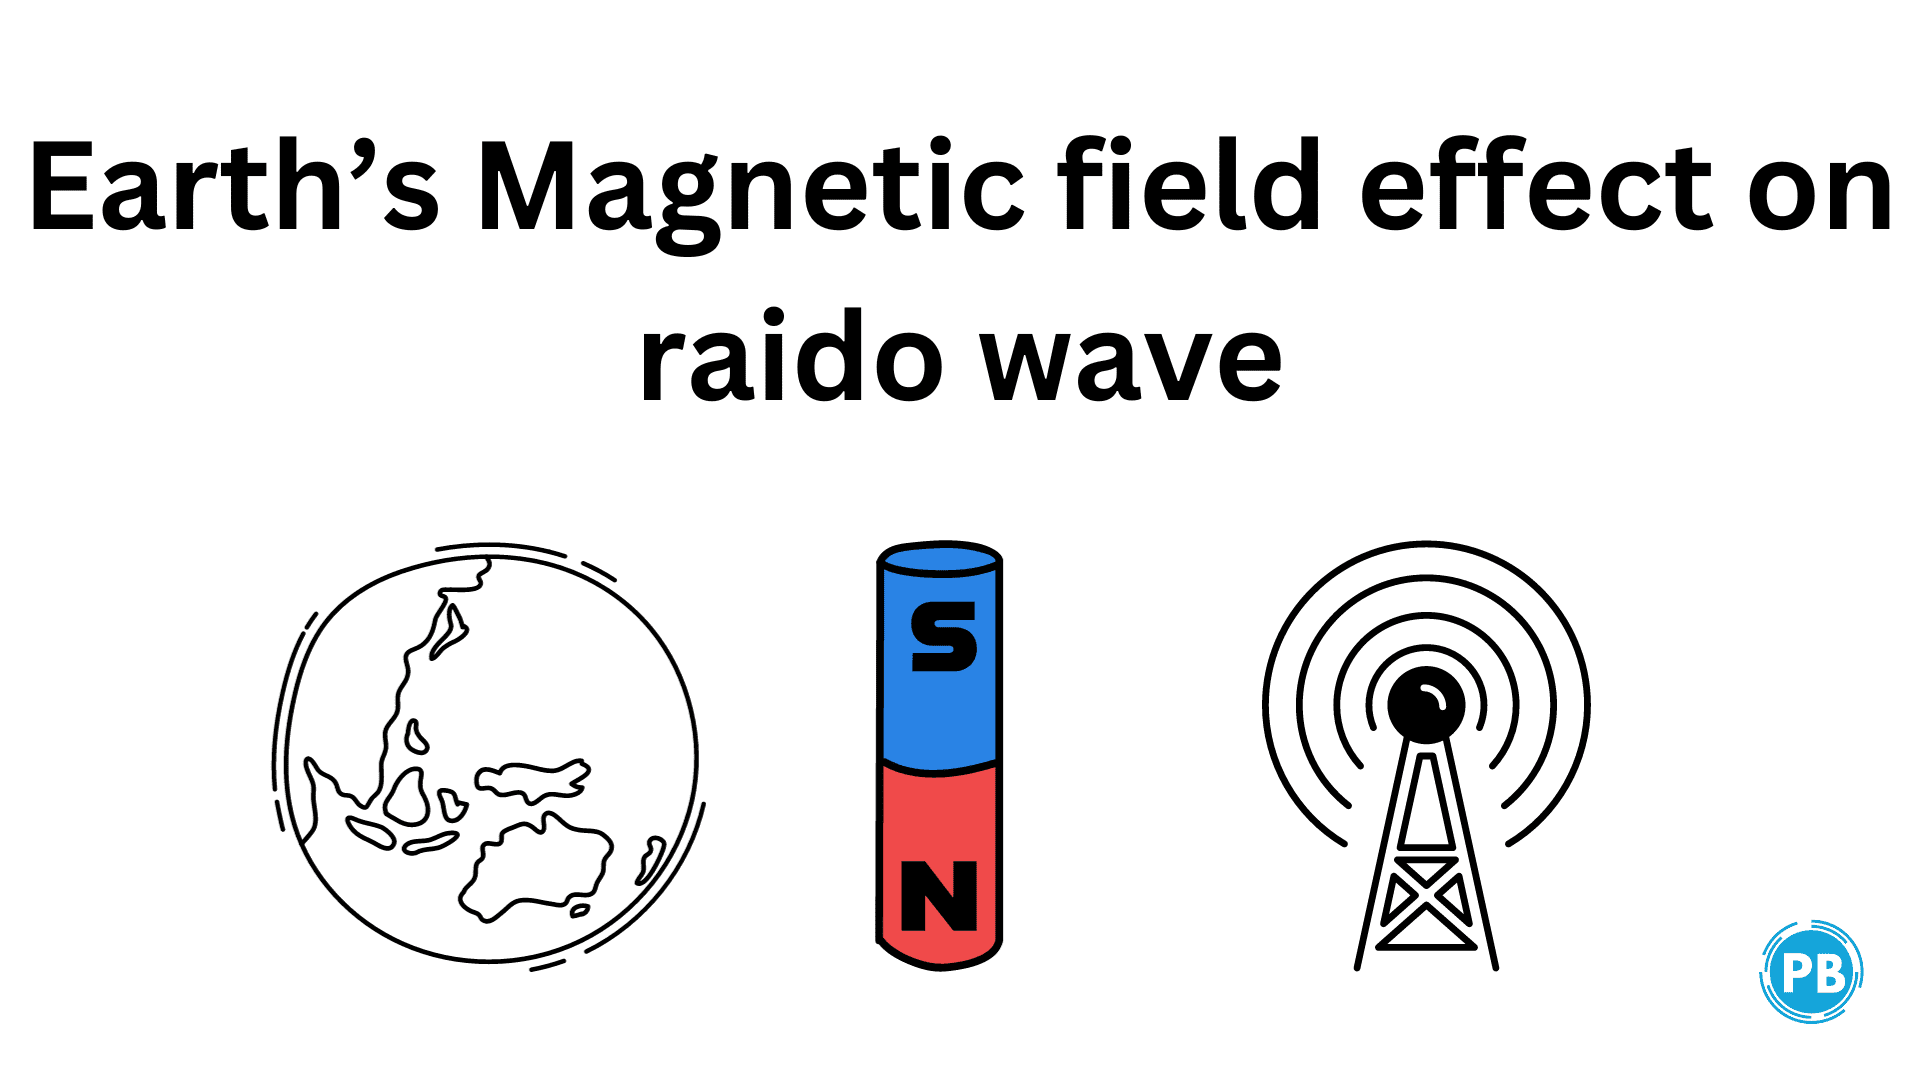 what is the effect of earth magnetic field on radio wave? details